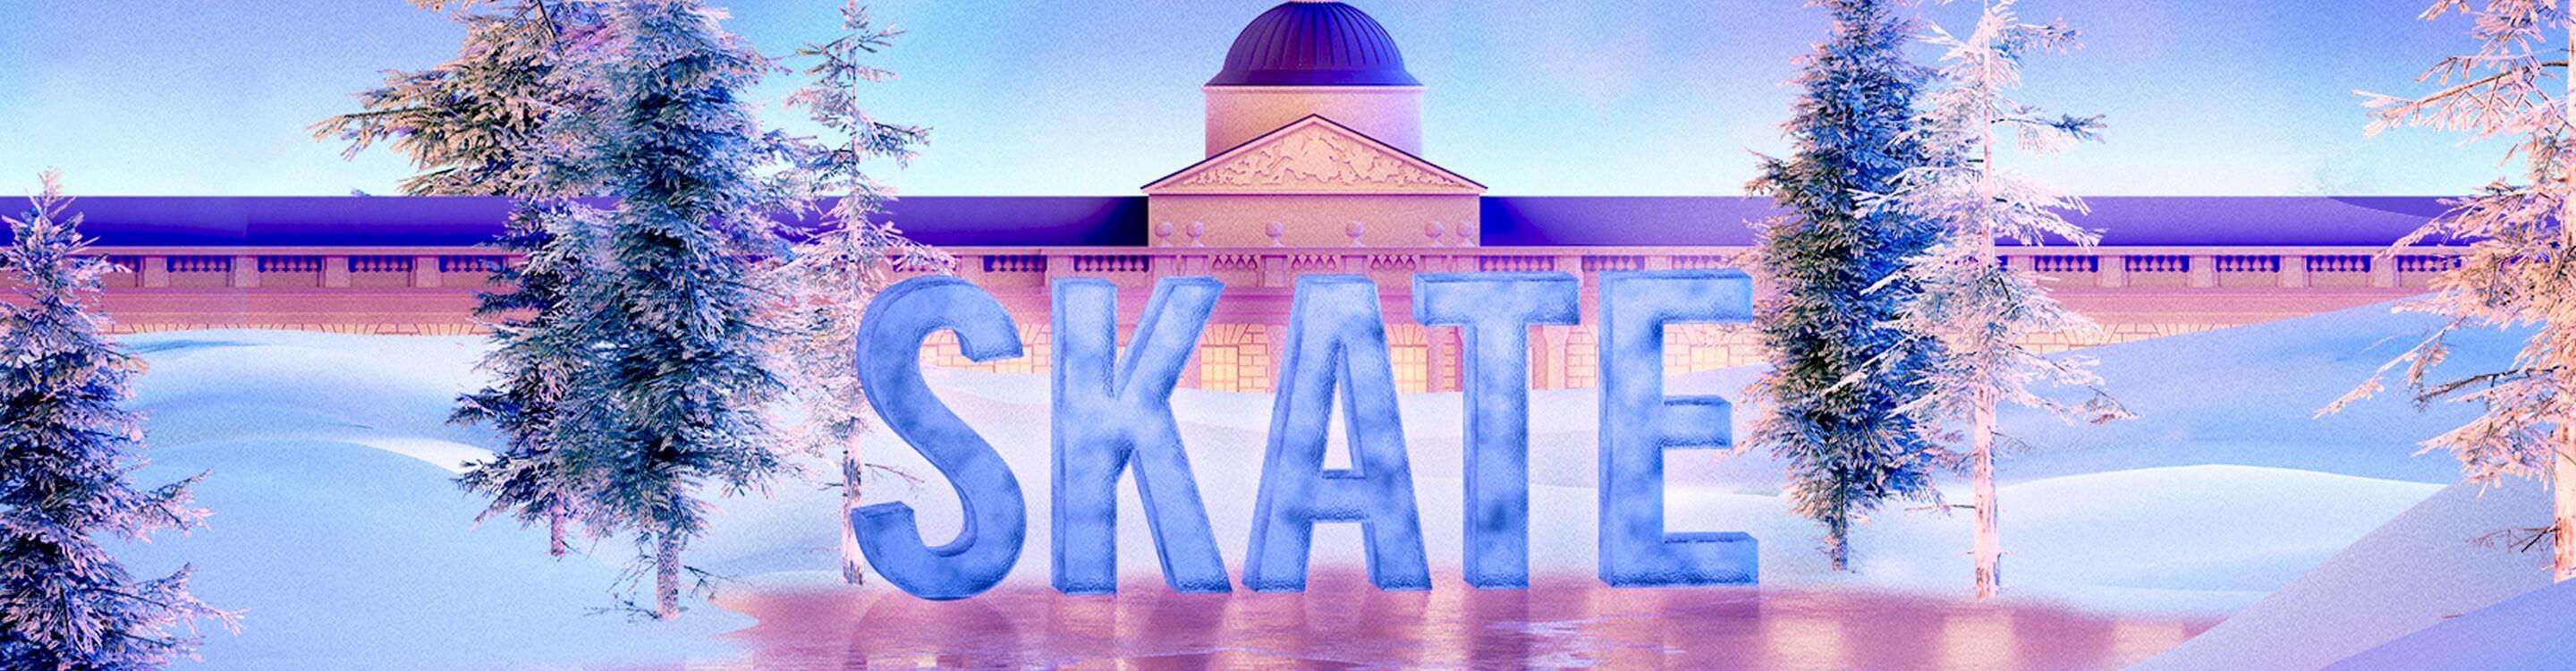 Promotional image for the Skate at Somerset House event